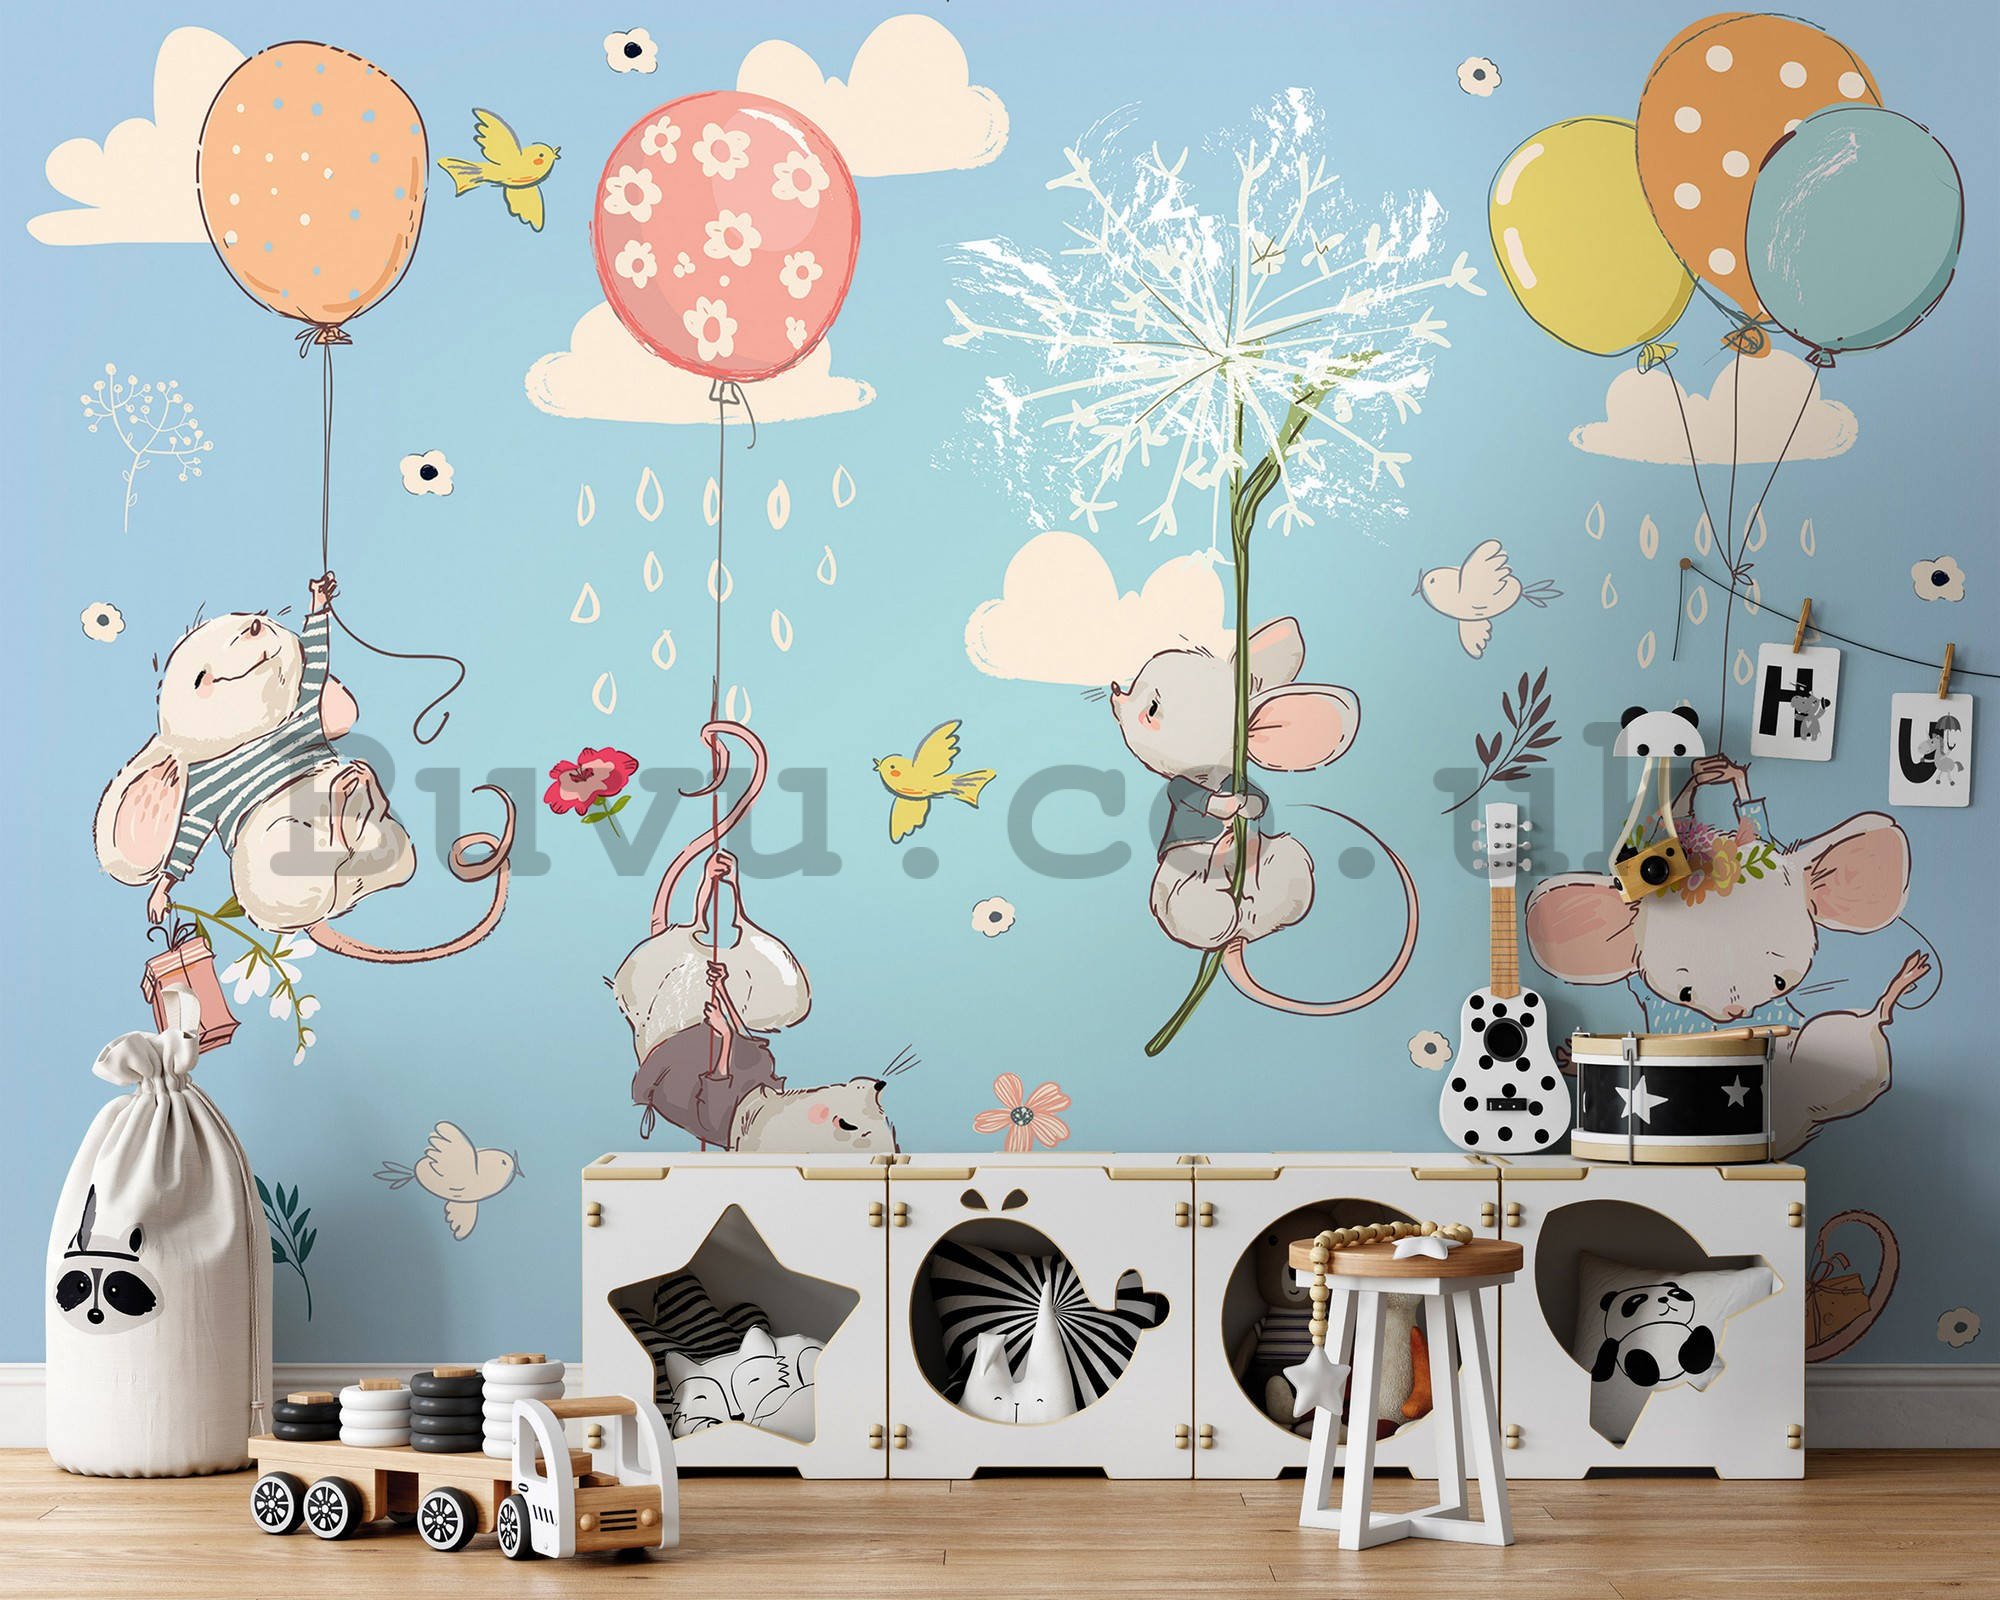 Wall mural vlies: Little mice in the clouds - 254x184 cm